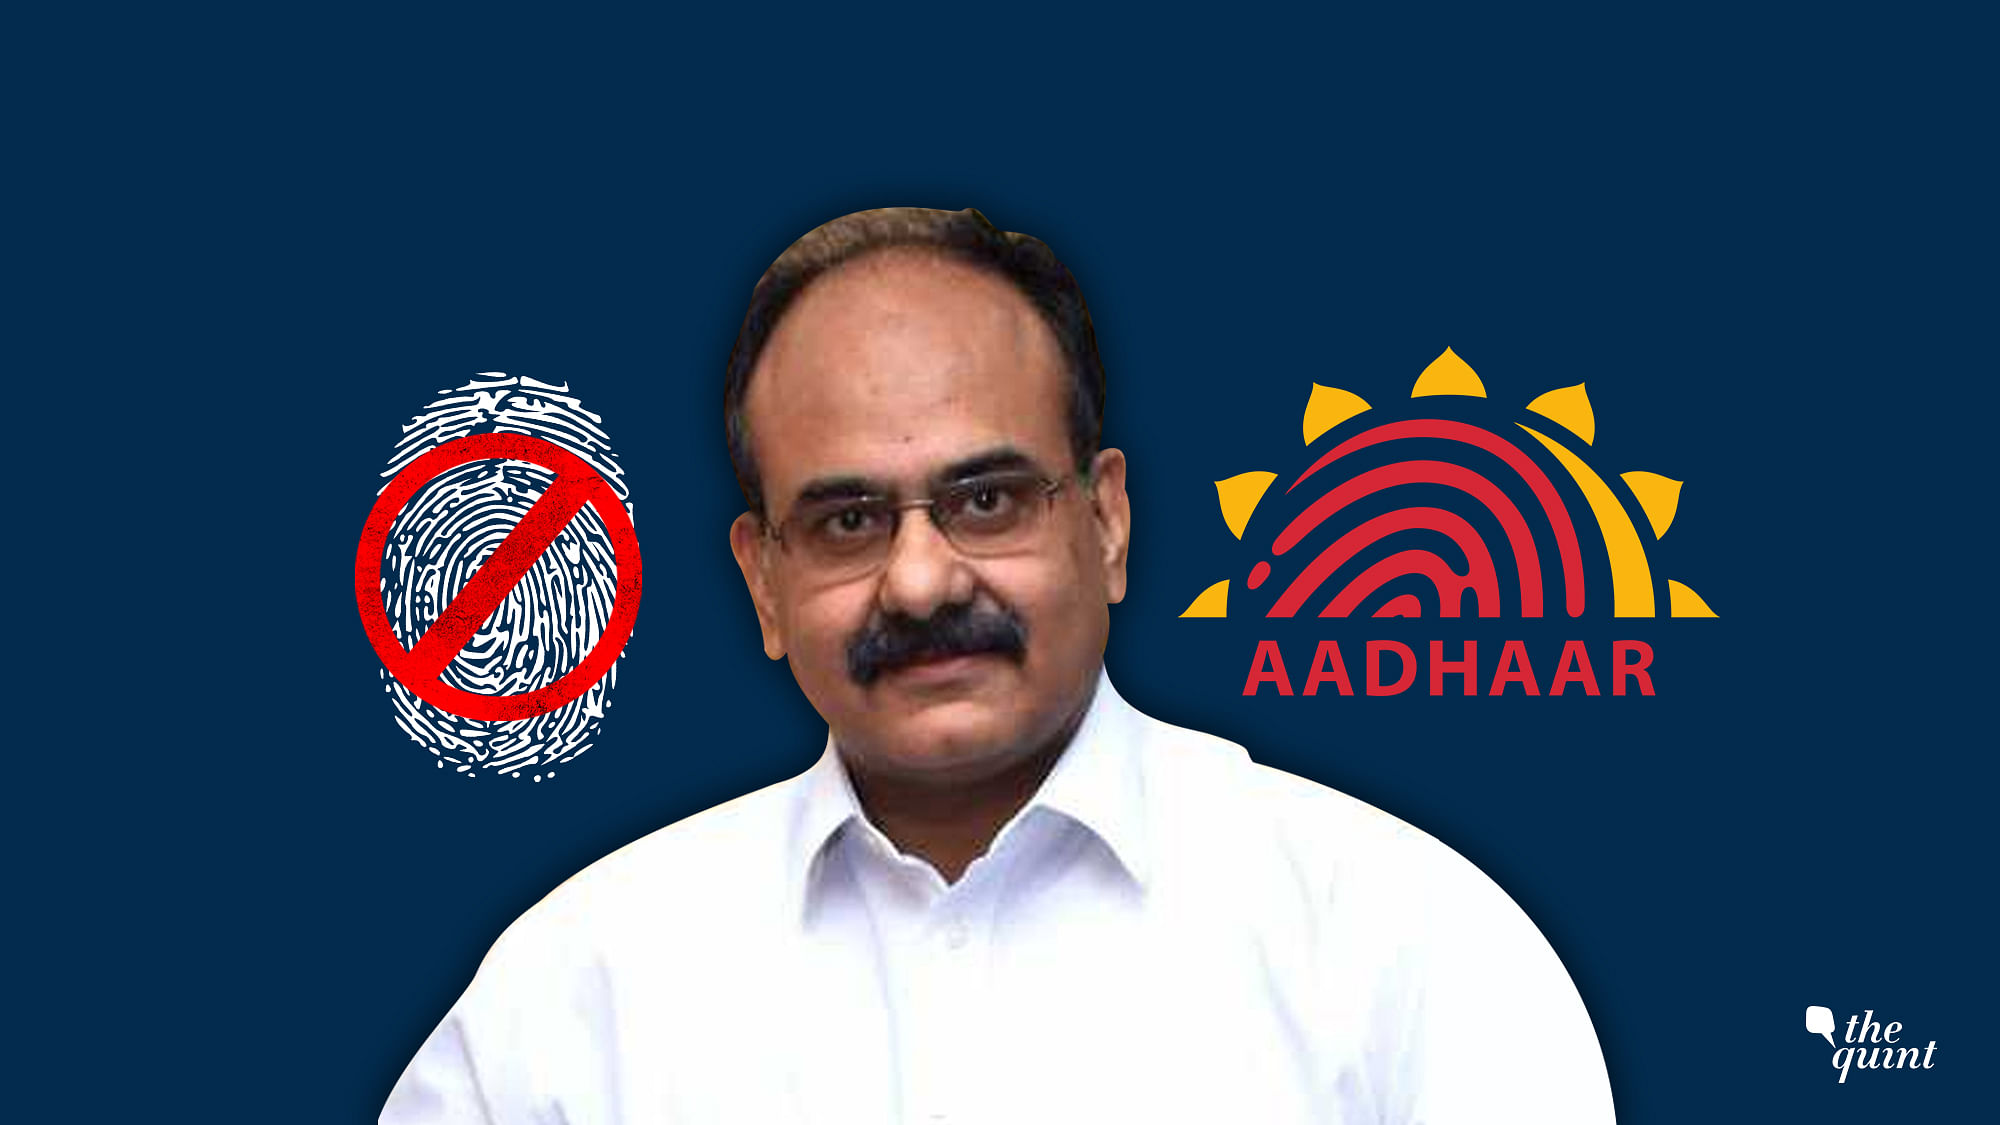 The Aadhaar CEO appears to have locked his own biometrics so they can’t be used for biometric authentication.